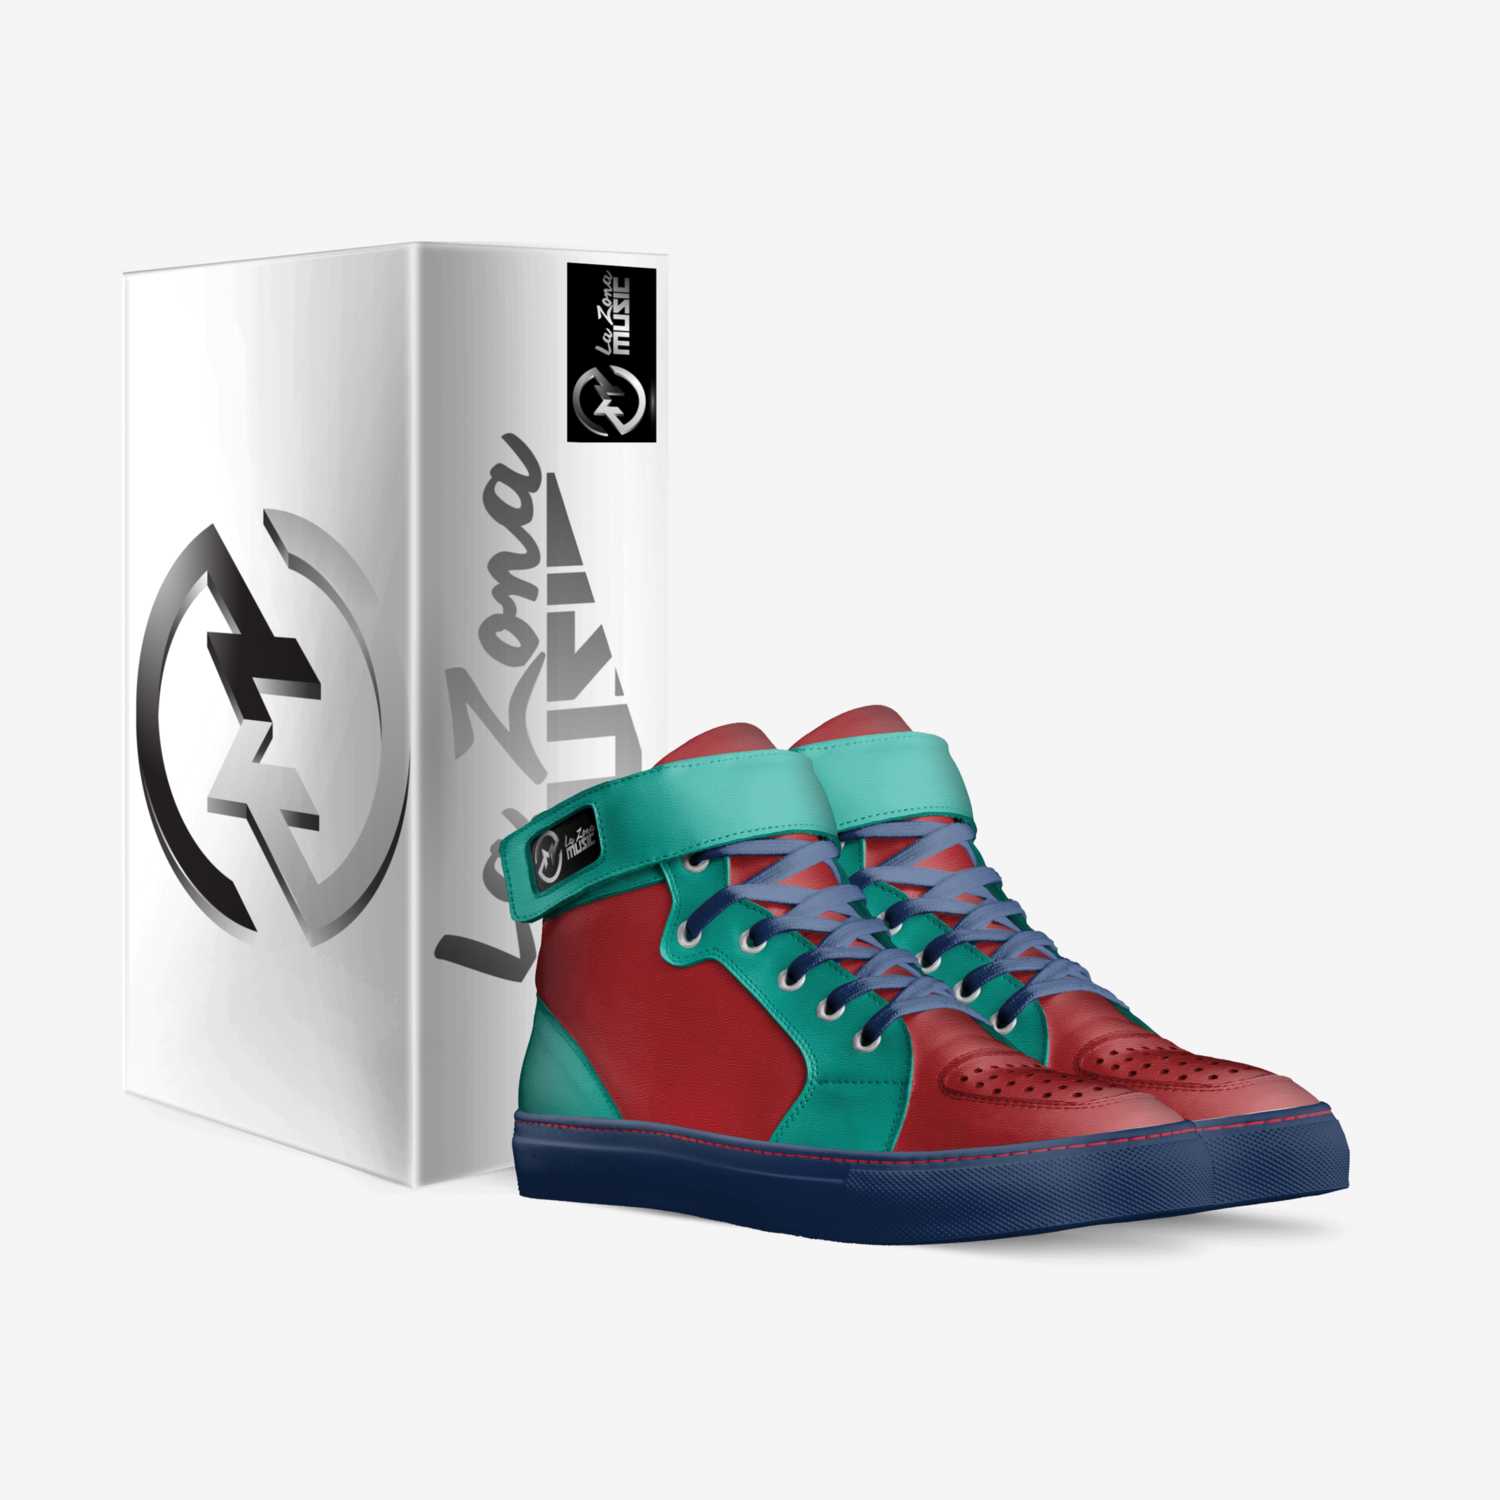 La Zona Music  custom made in Italy shoes by Yovanny Sanchez | Box view